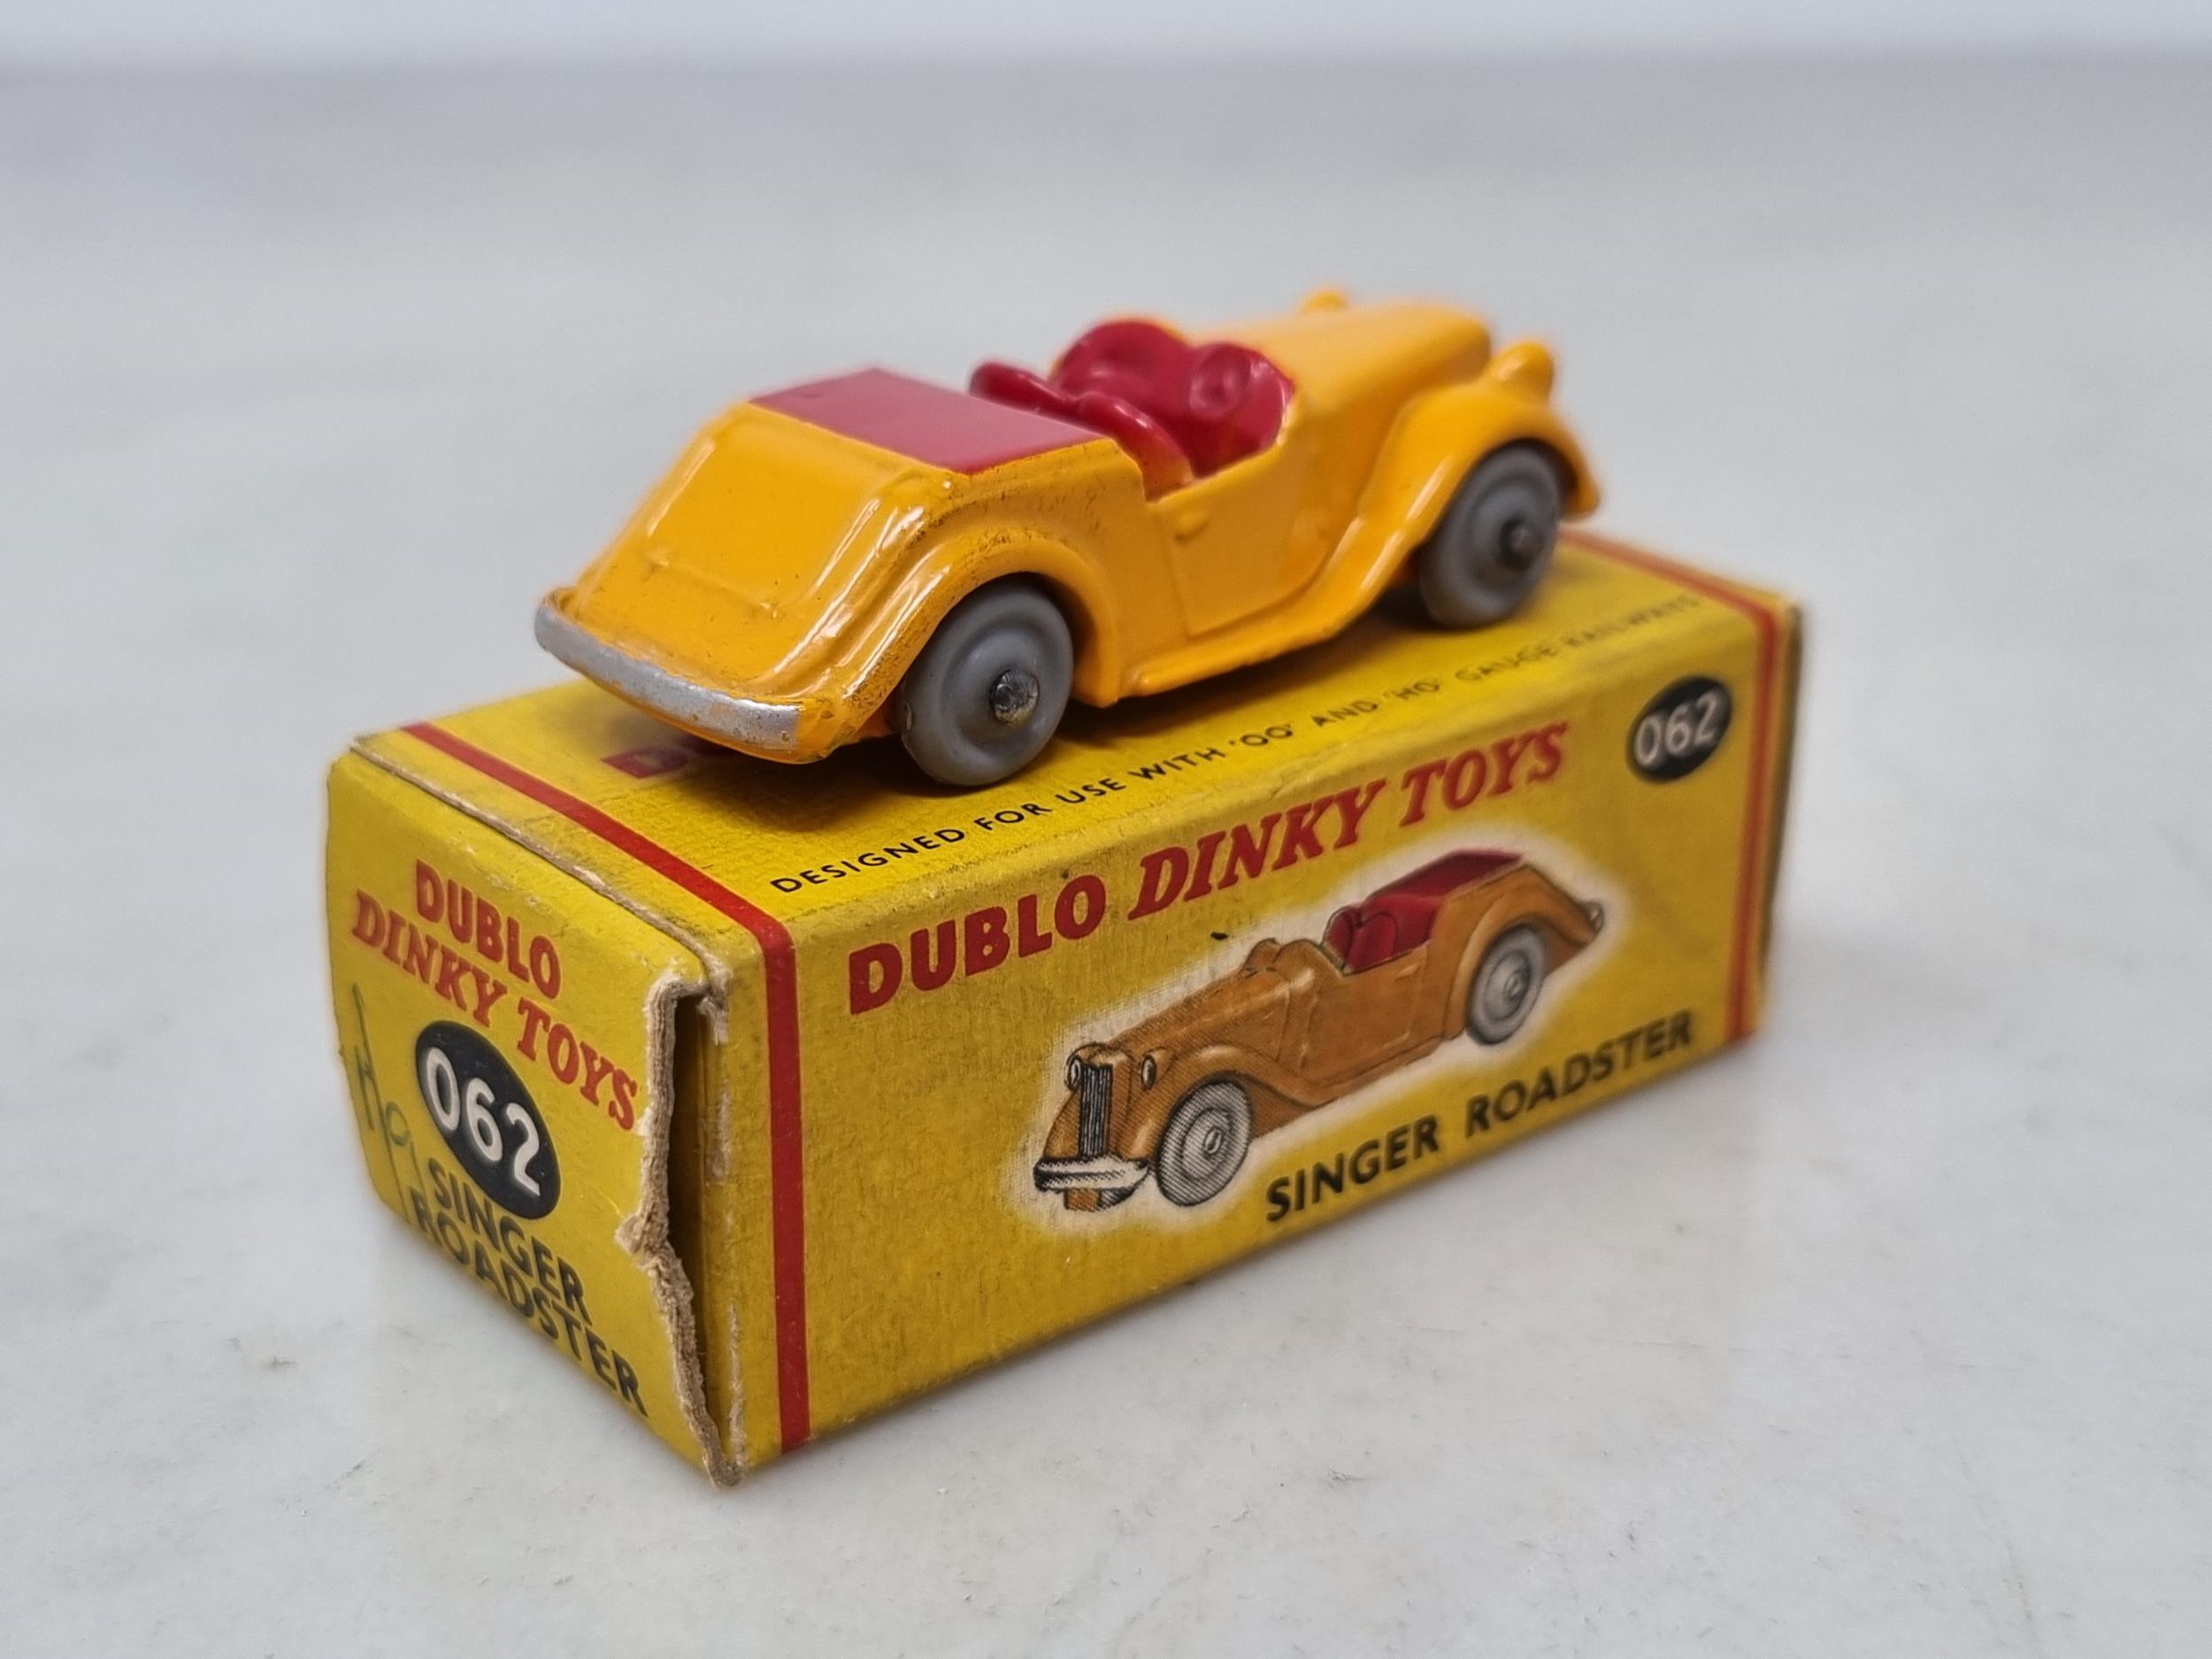 A boxed Dublo Dinky 062 Singer Roadster, M, box Ex - Image 3 of 3